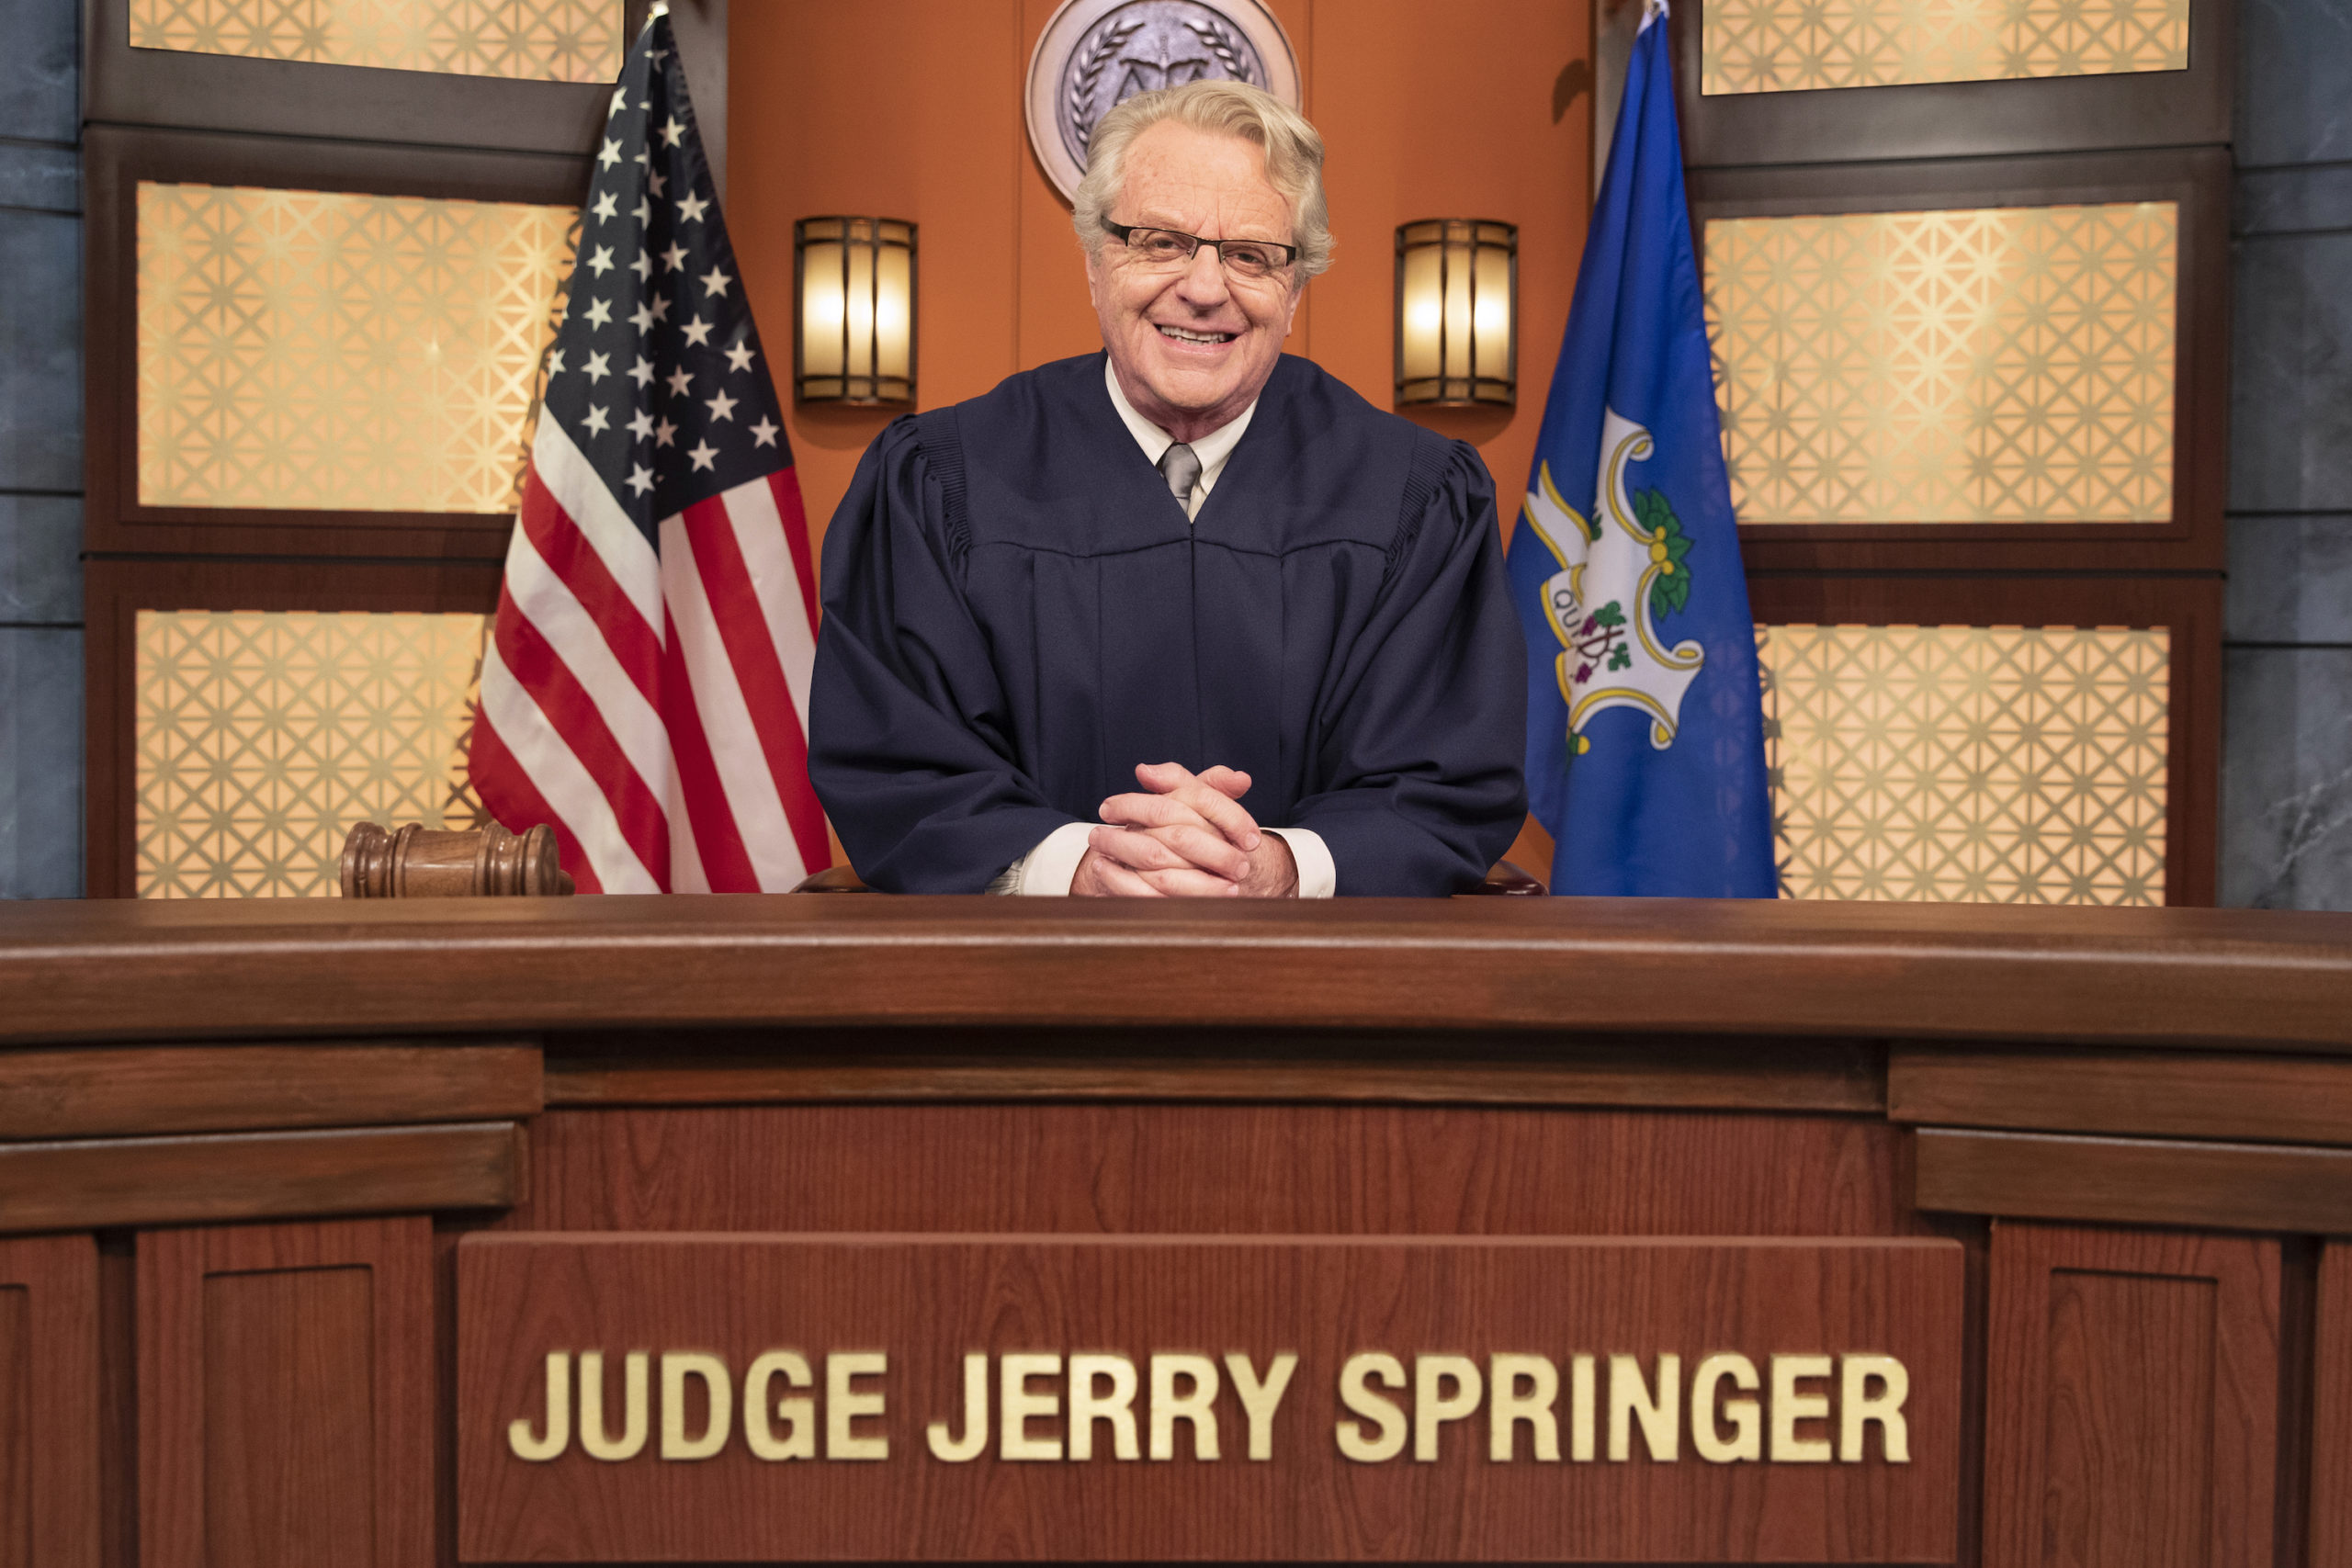 #Judge Jerry: Cancelled, No Fourth Season for Jerry Springer Court Series